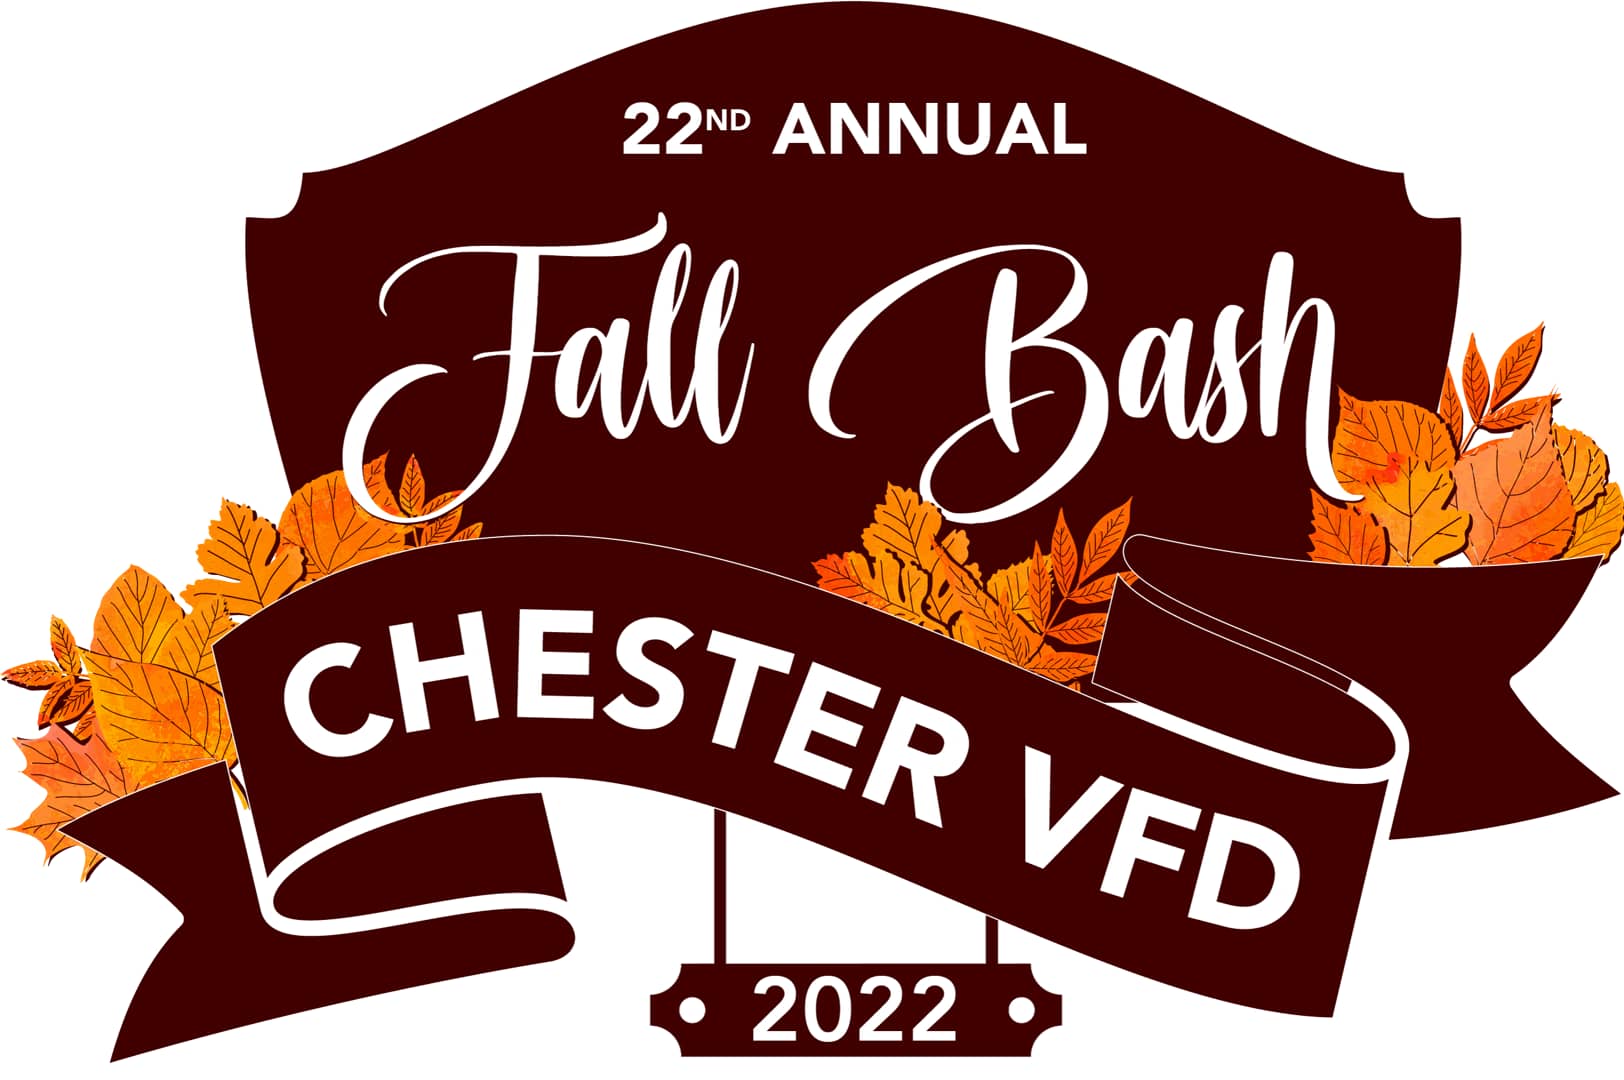 22nd Annual Chester VFD Fall Bash on Vimeo